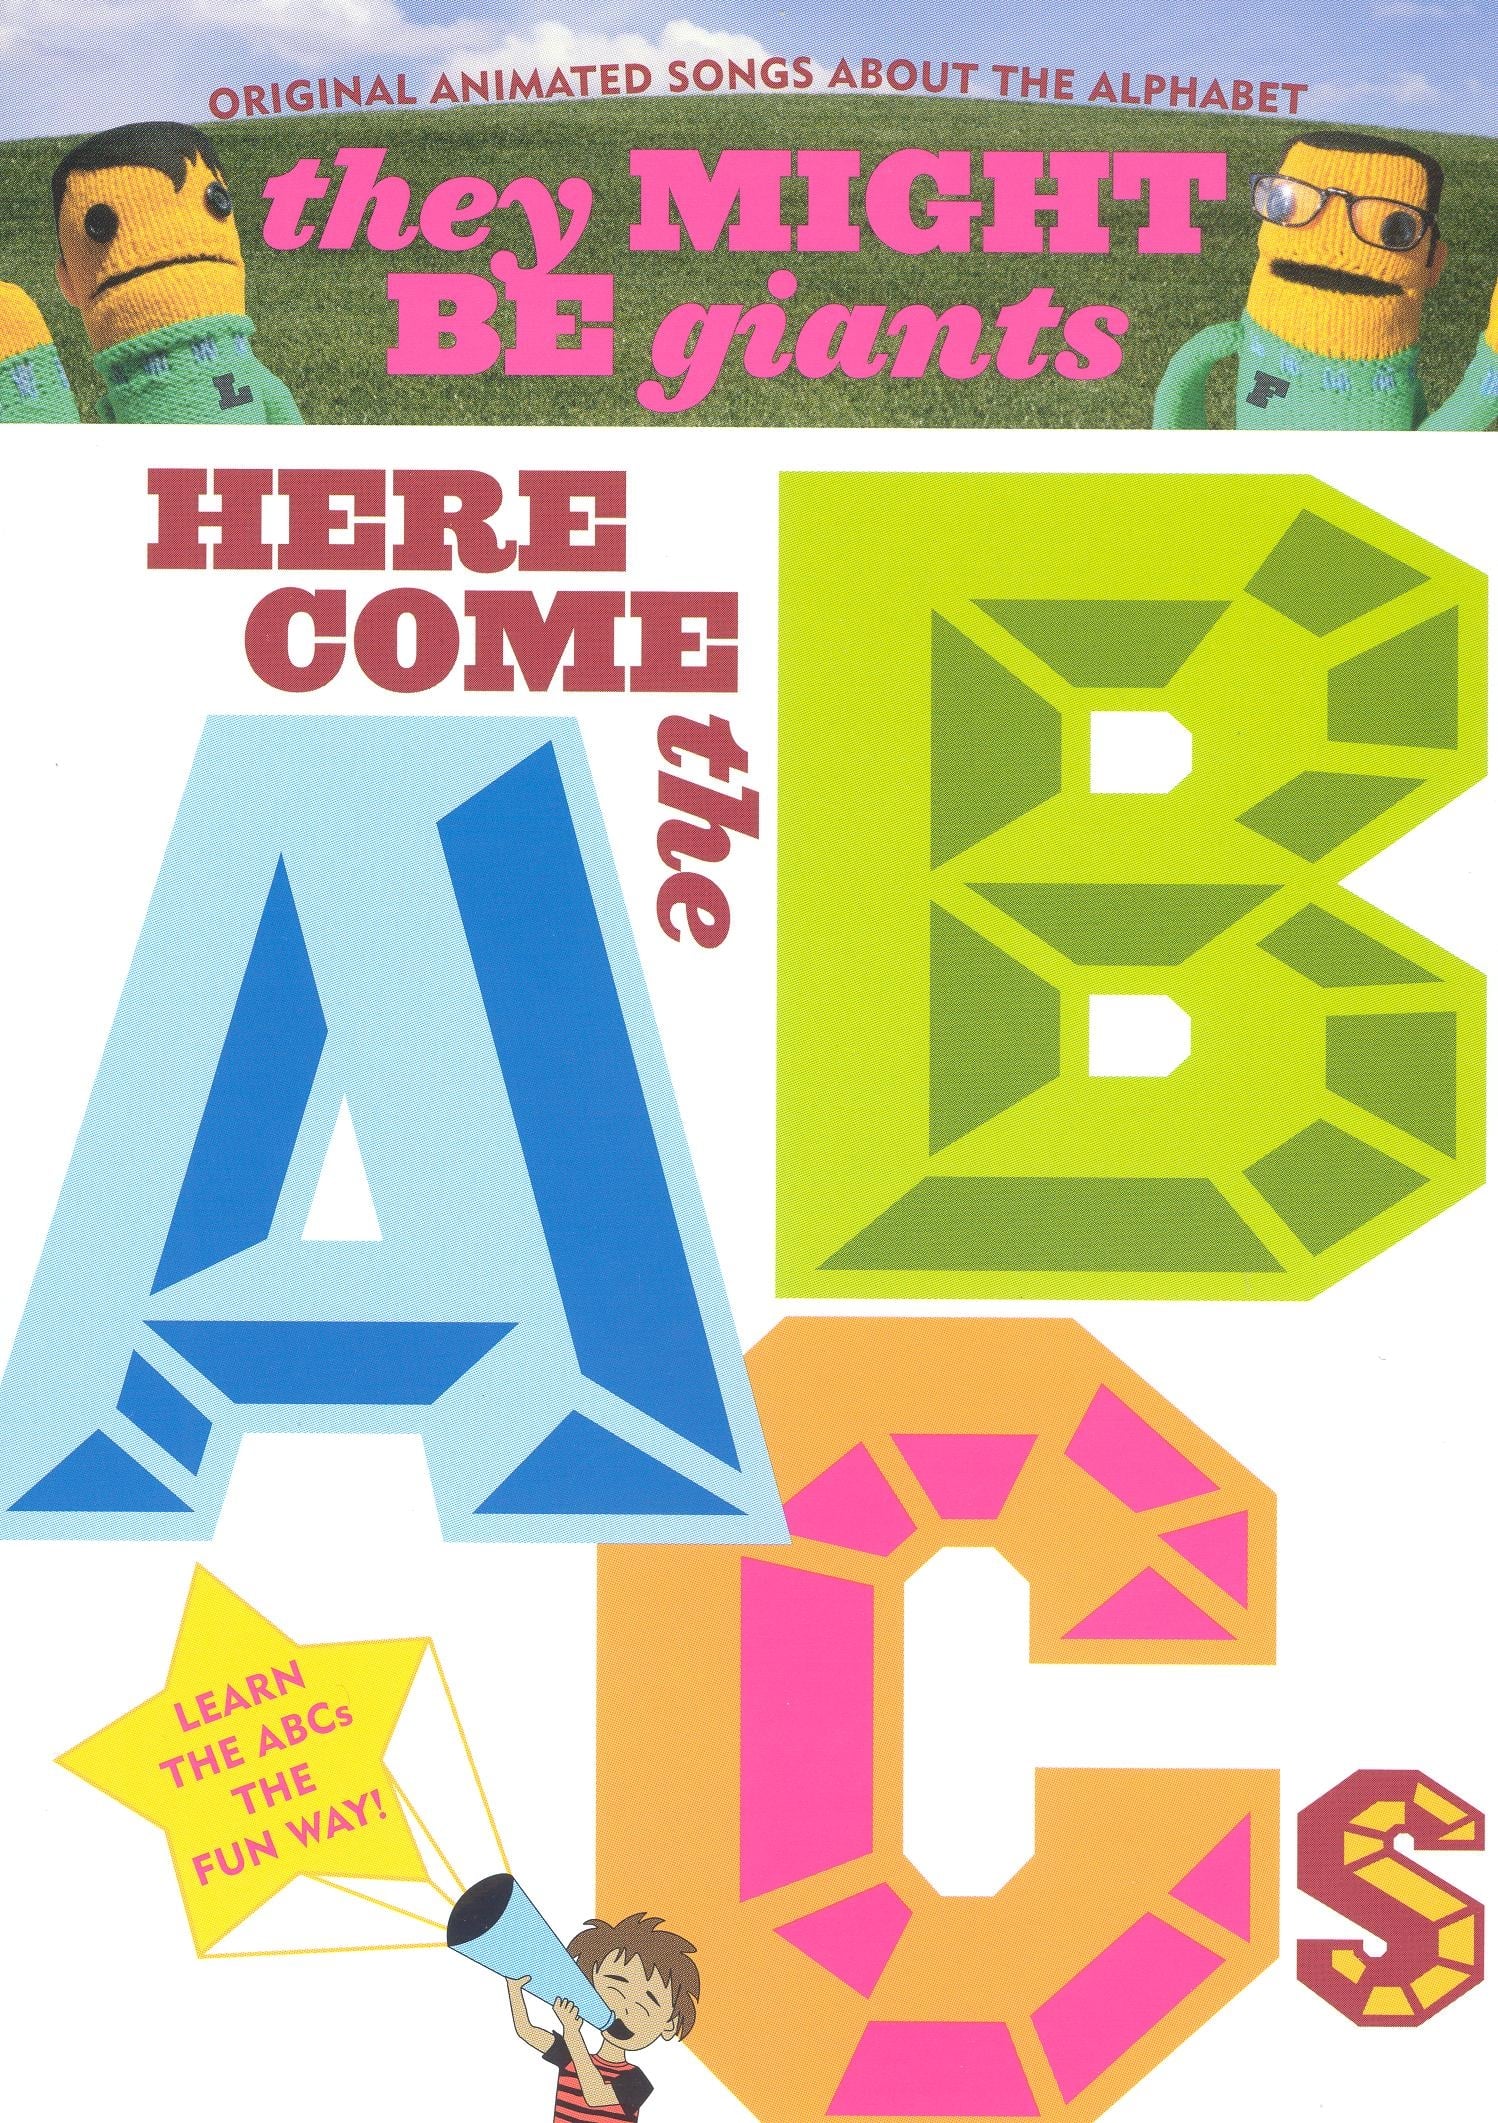 They Might Be Giants: Here Come The ABCs